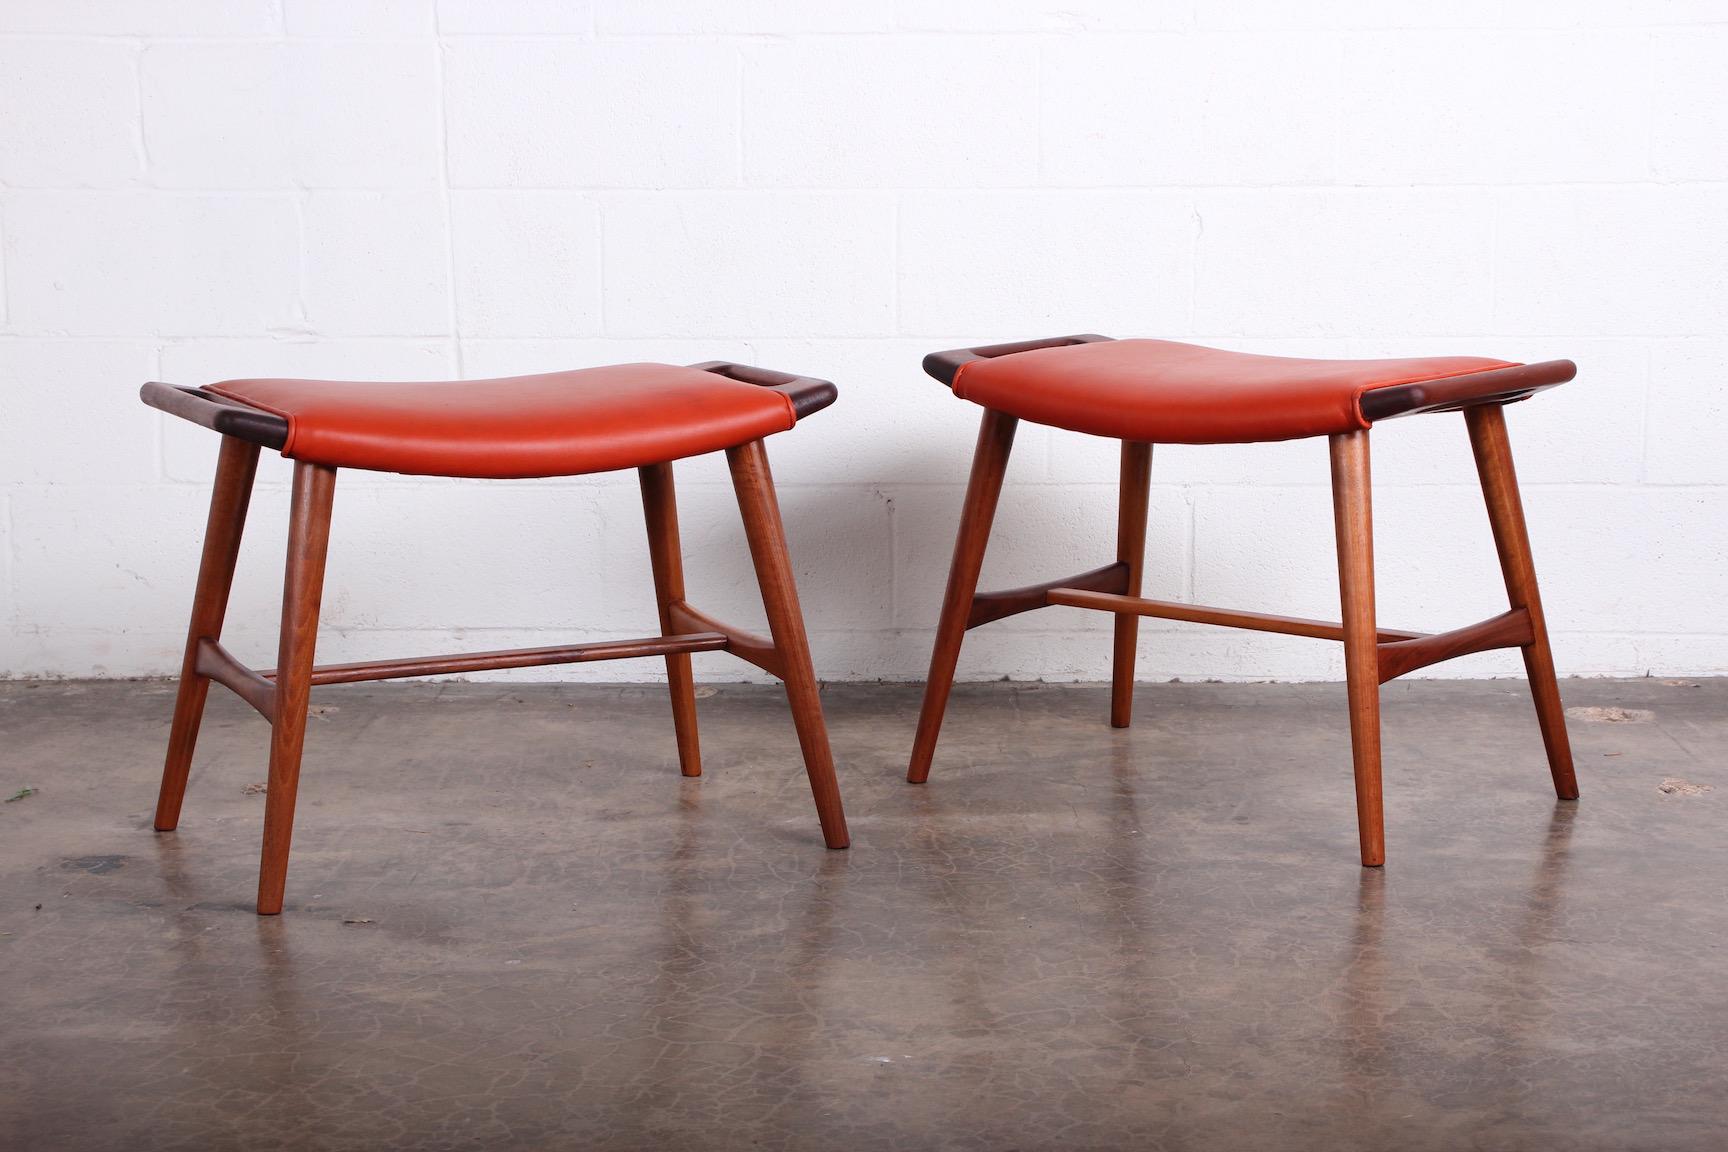 A pair of teak and leather AP-30 stools designed by Hans Wegner for AP-Stolen.